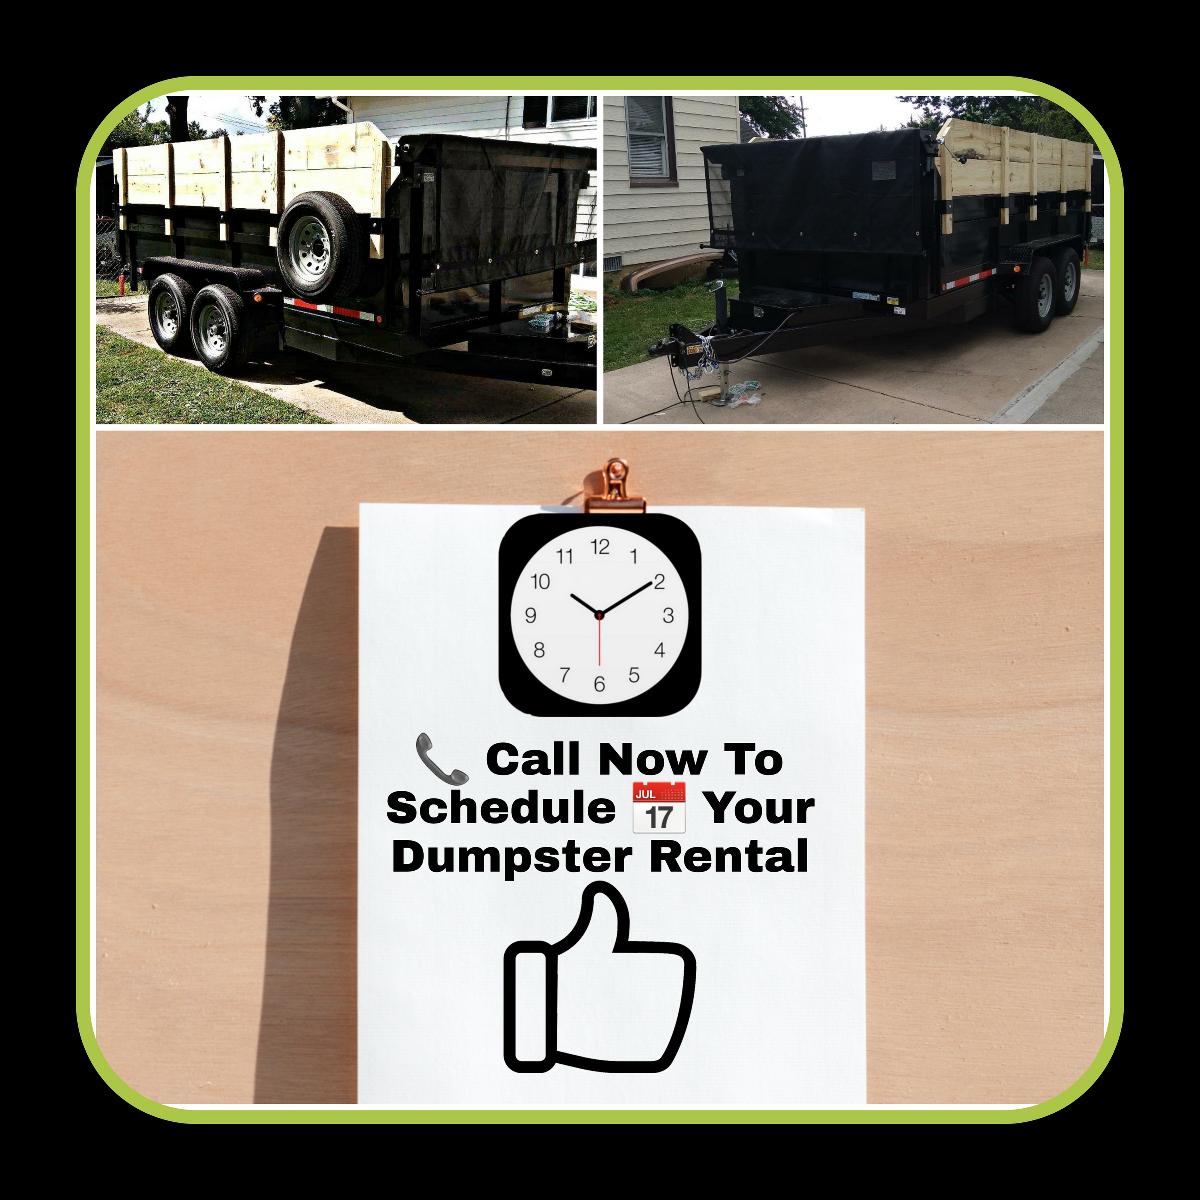 Dumpster rental and clean out/ hauling